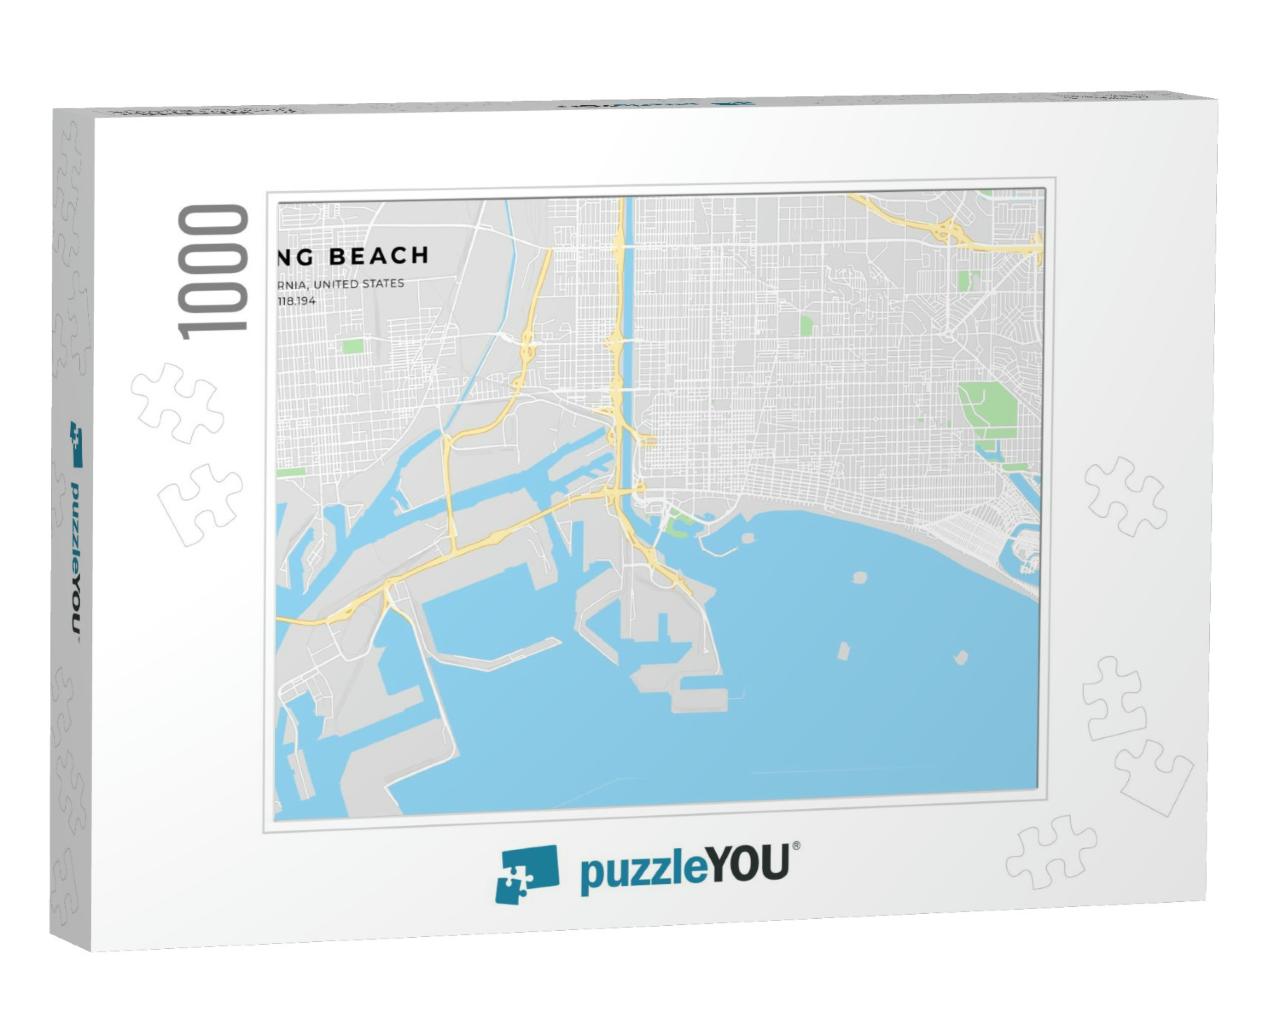 Printable Street Map of Long Beach Including Highways, Ma... Jigsaw Puzzle with 1000 pieces